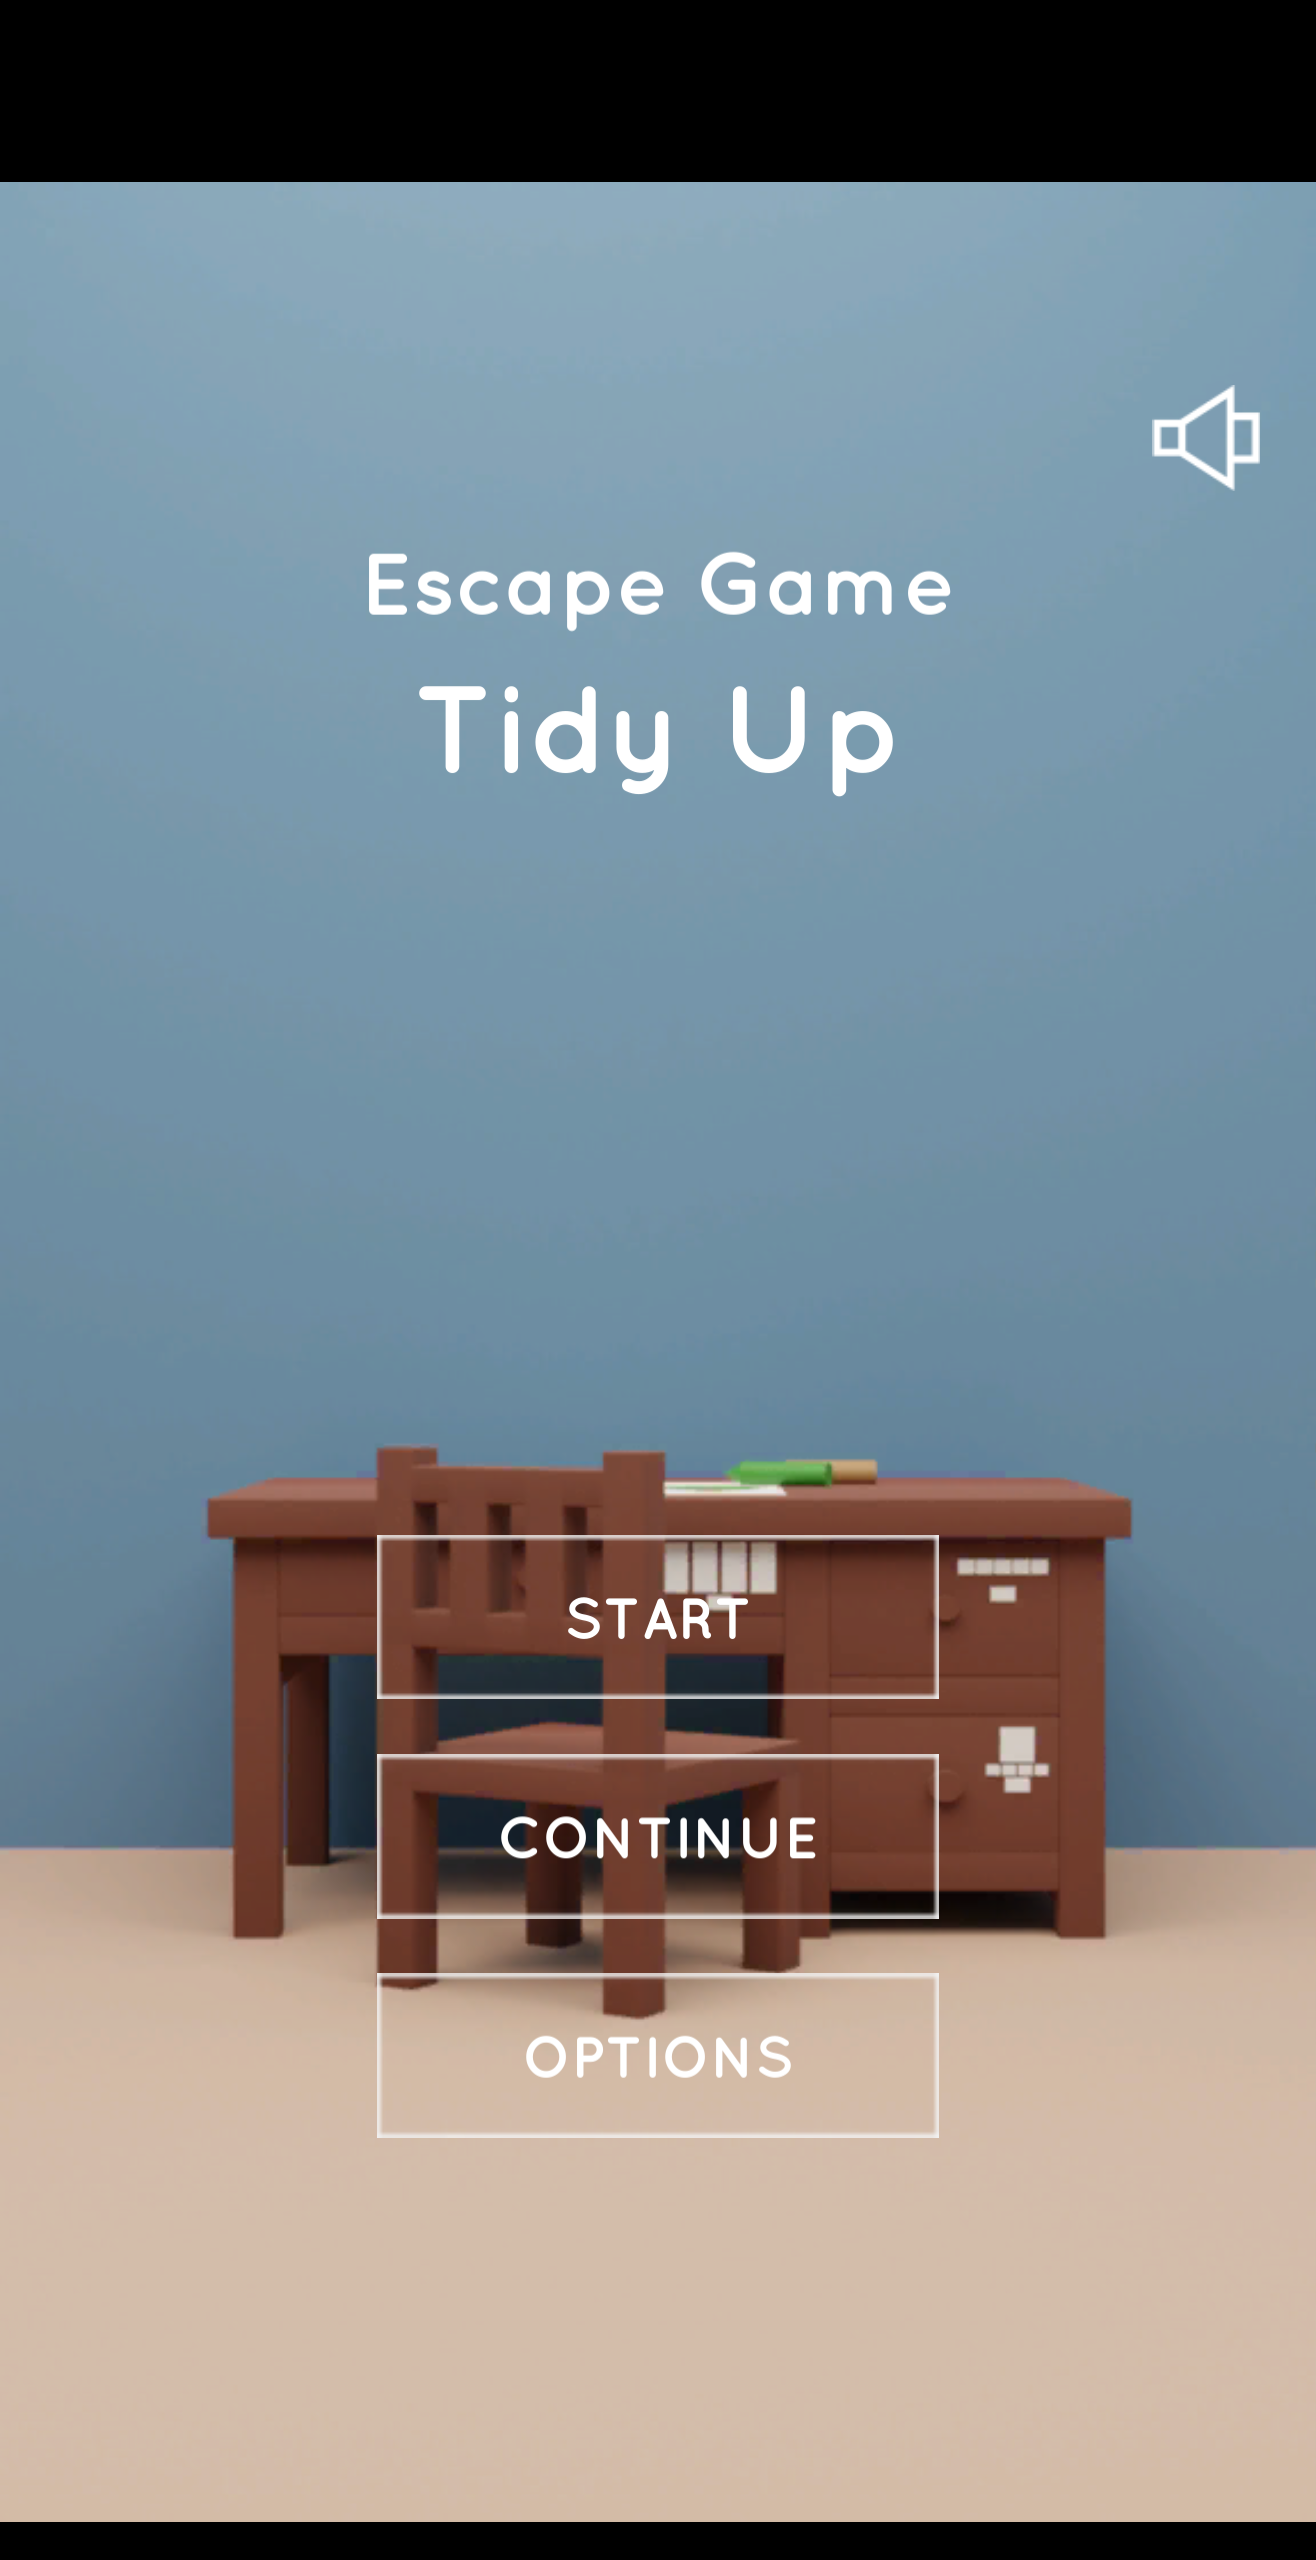 Escape Game Tidy Up游戏截图